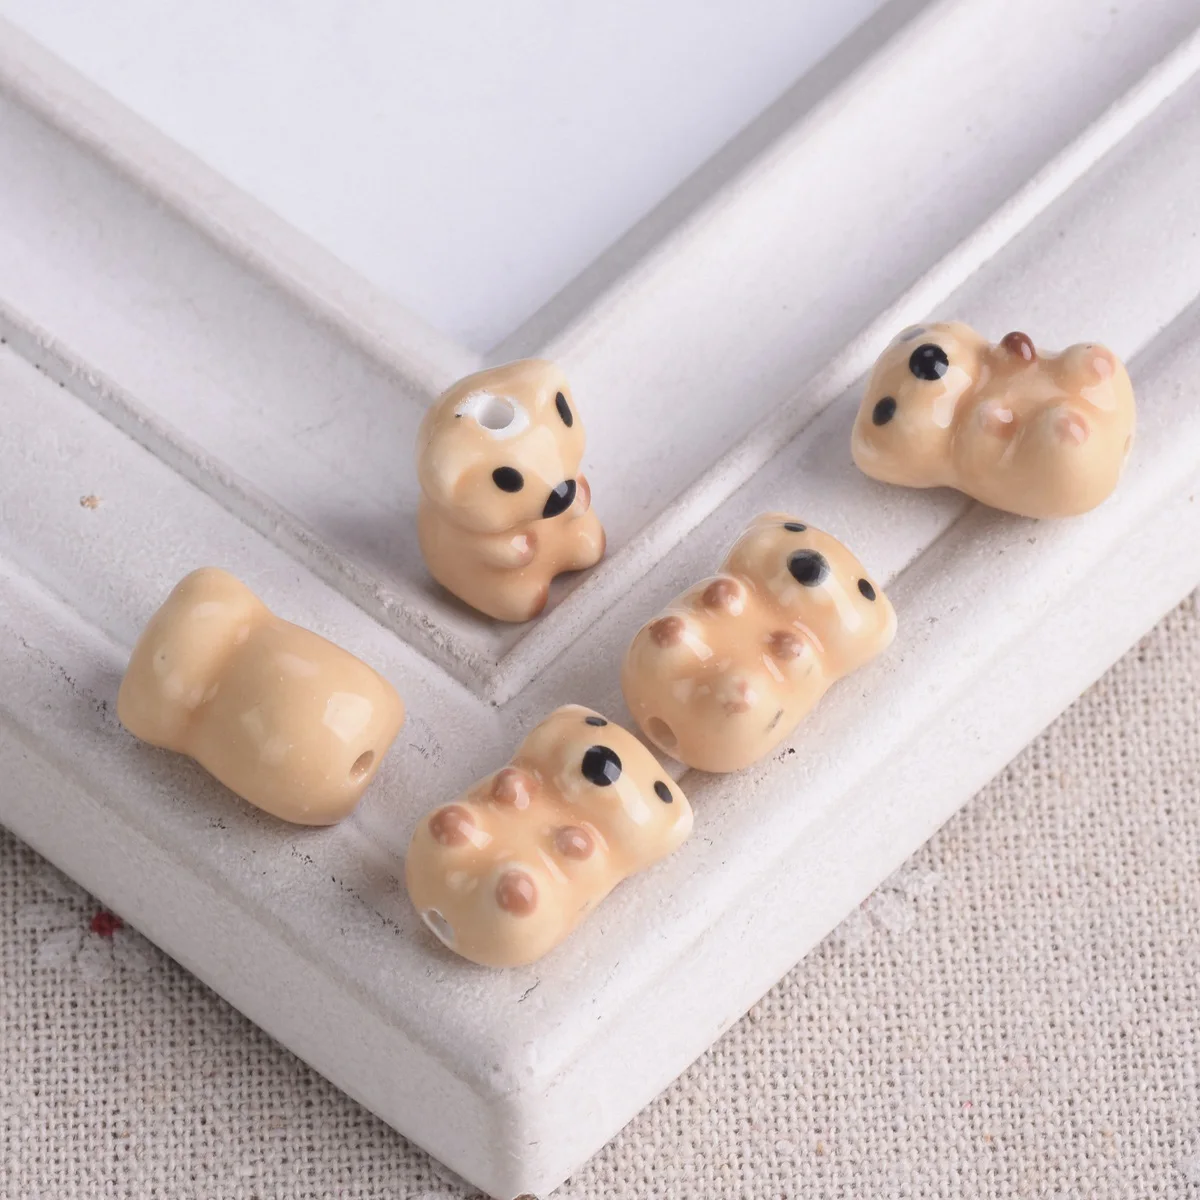 5pcs Brown Bear Shape 17x11mm Ceramic Porcelain Loose Beads For Jewelry Making DIY Craft Finndings flower pot silicone mold geometry shape mold plaster craft making supply